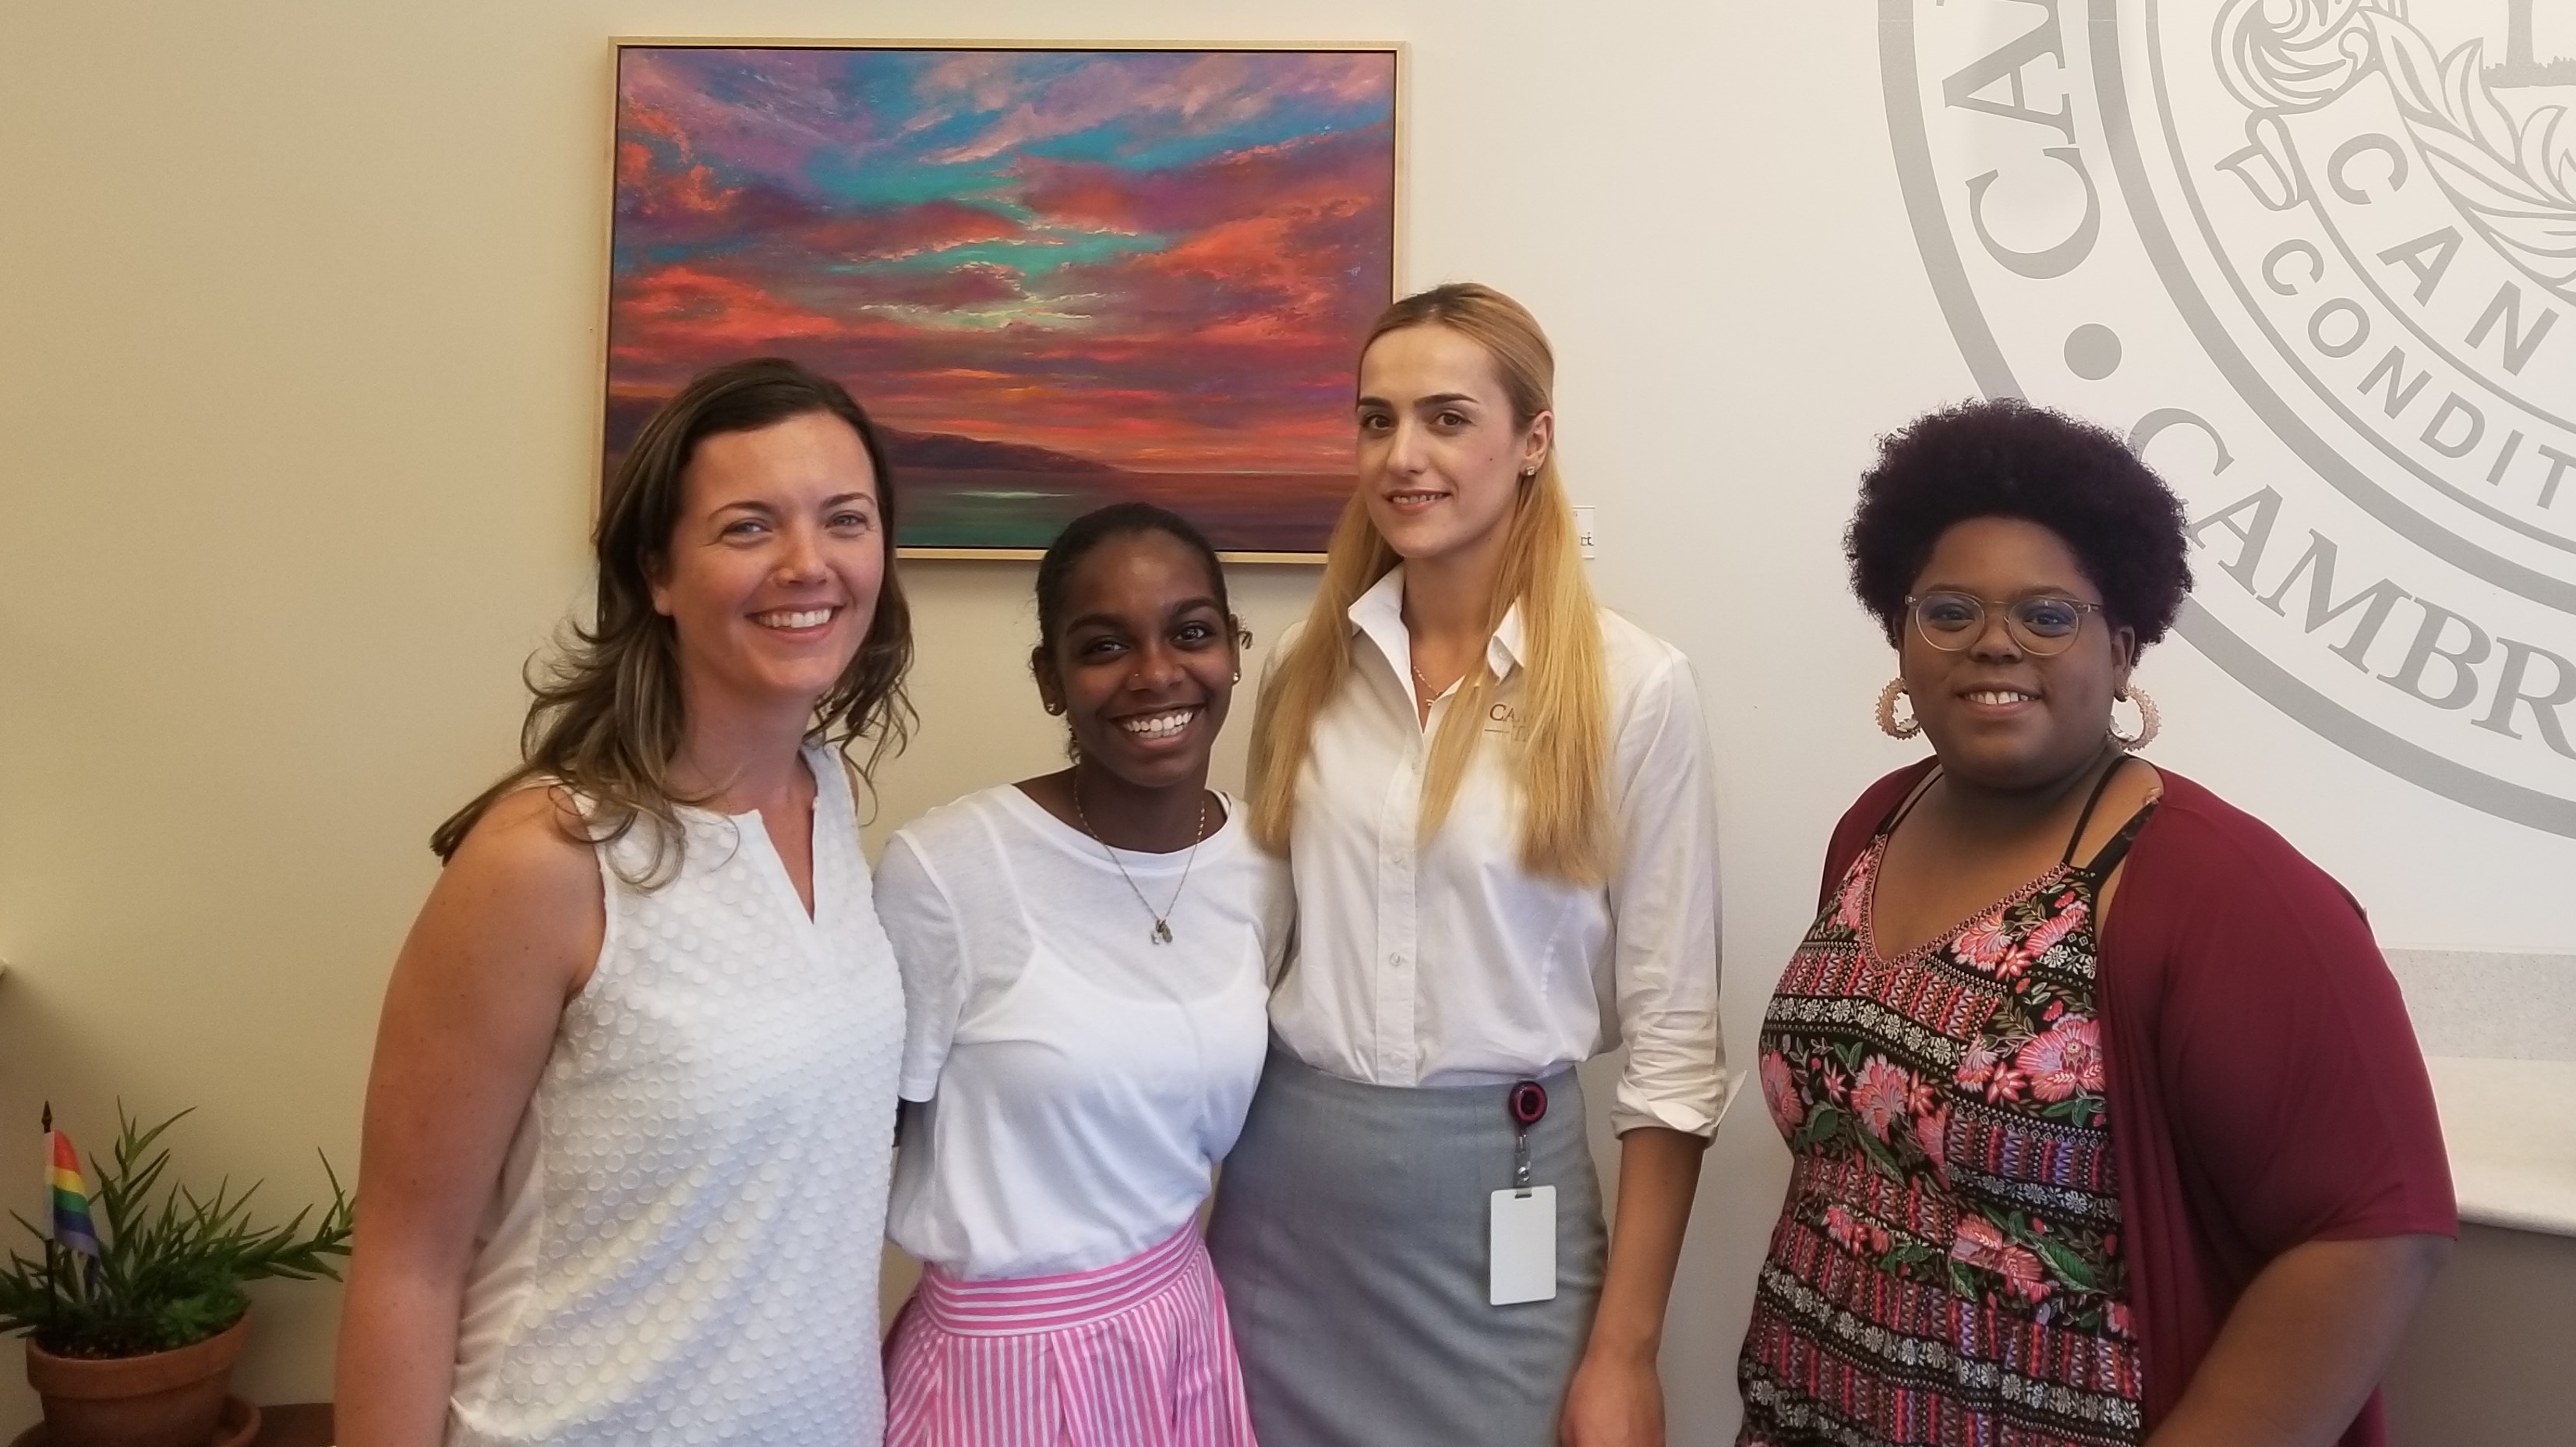 Imani Islam with staff from the Art Connection with community partner